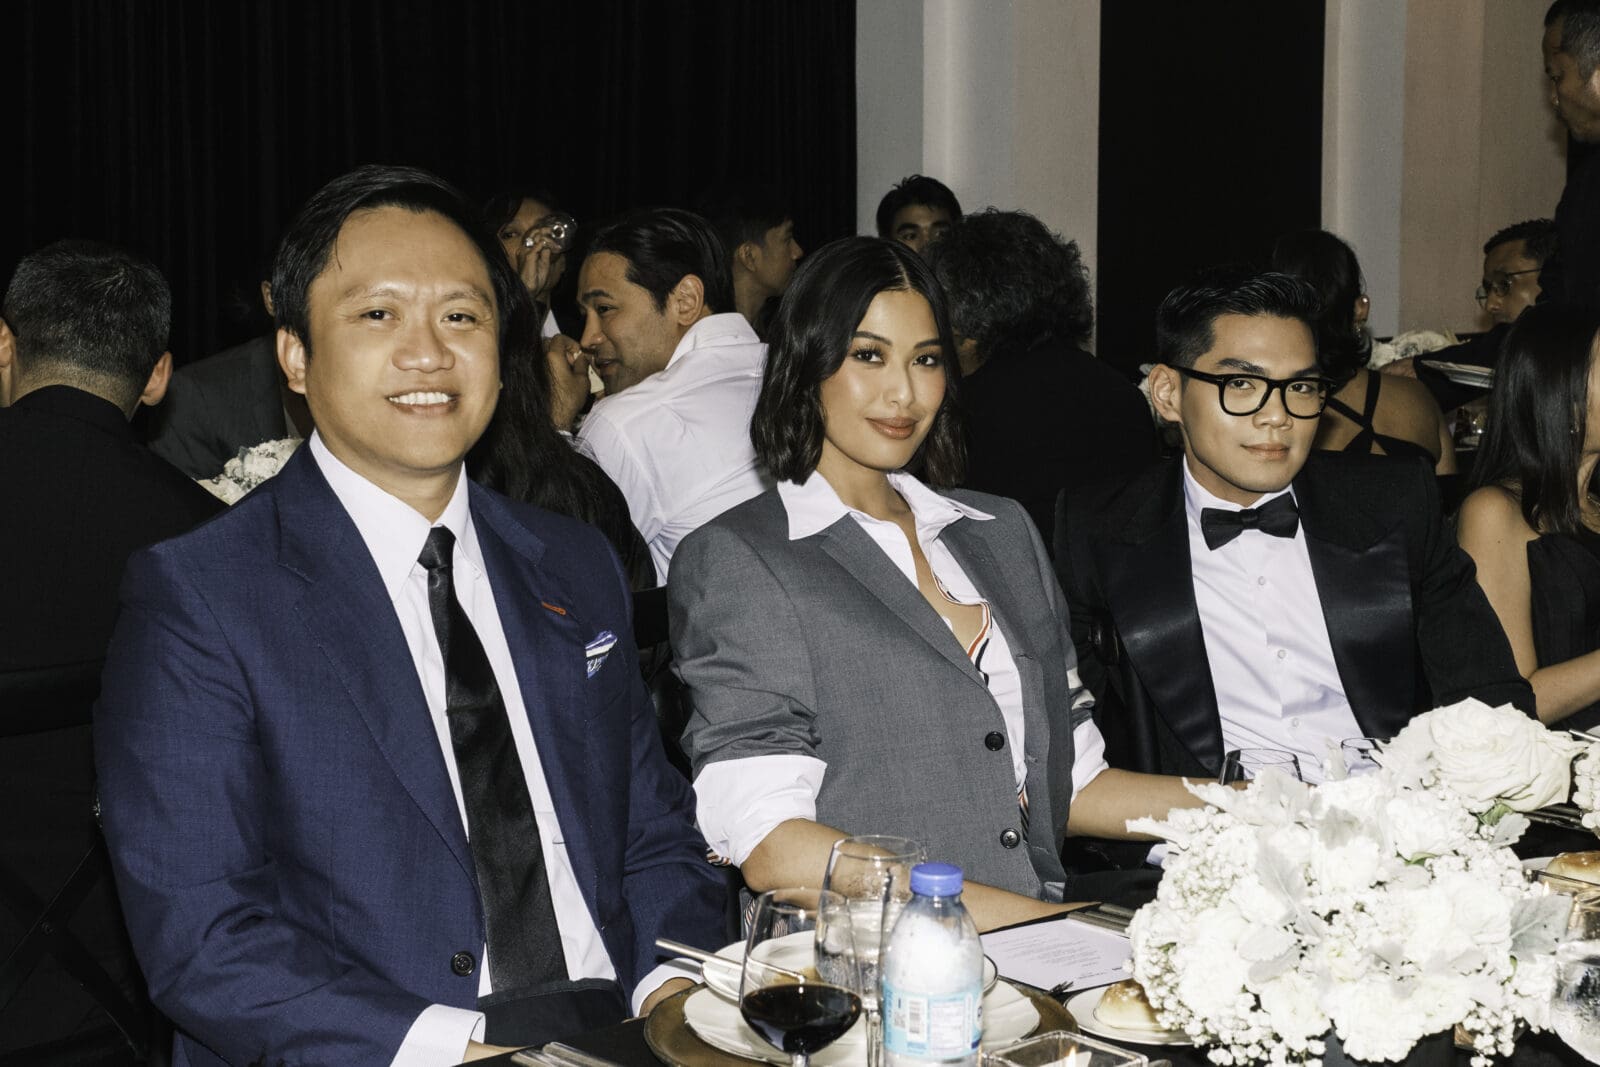 Blue Avelino, Michelle Dee, and Chris Nick at the Galaxy x Thom Browne Pre-launch event